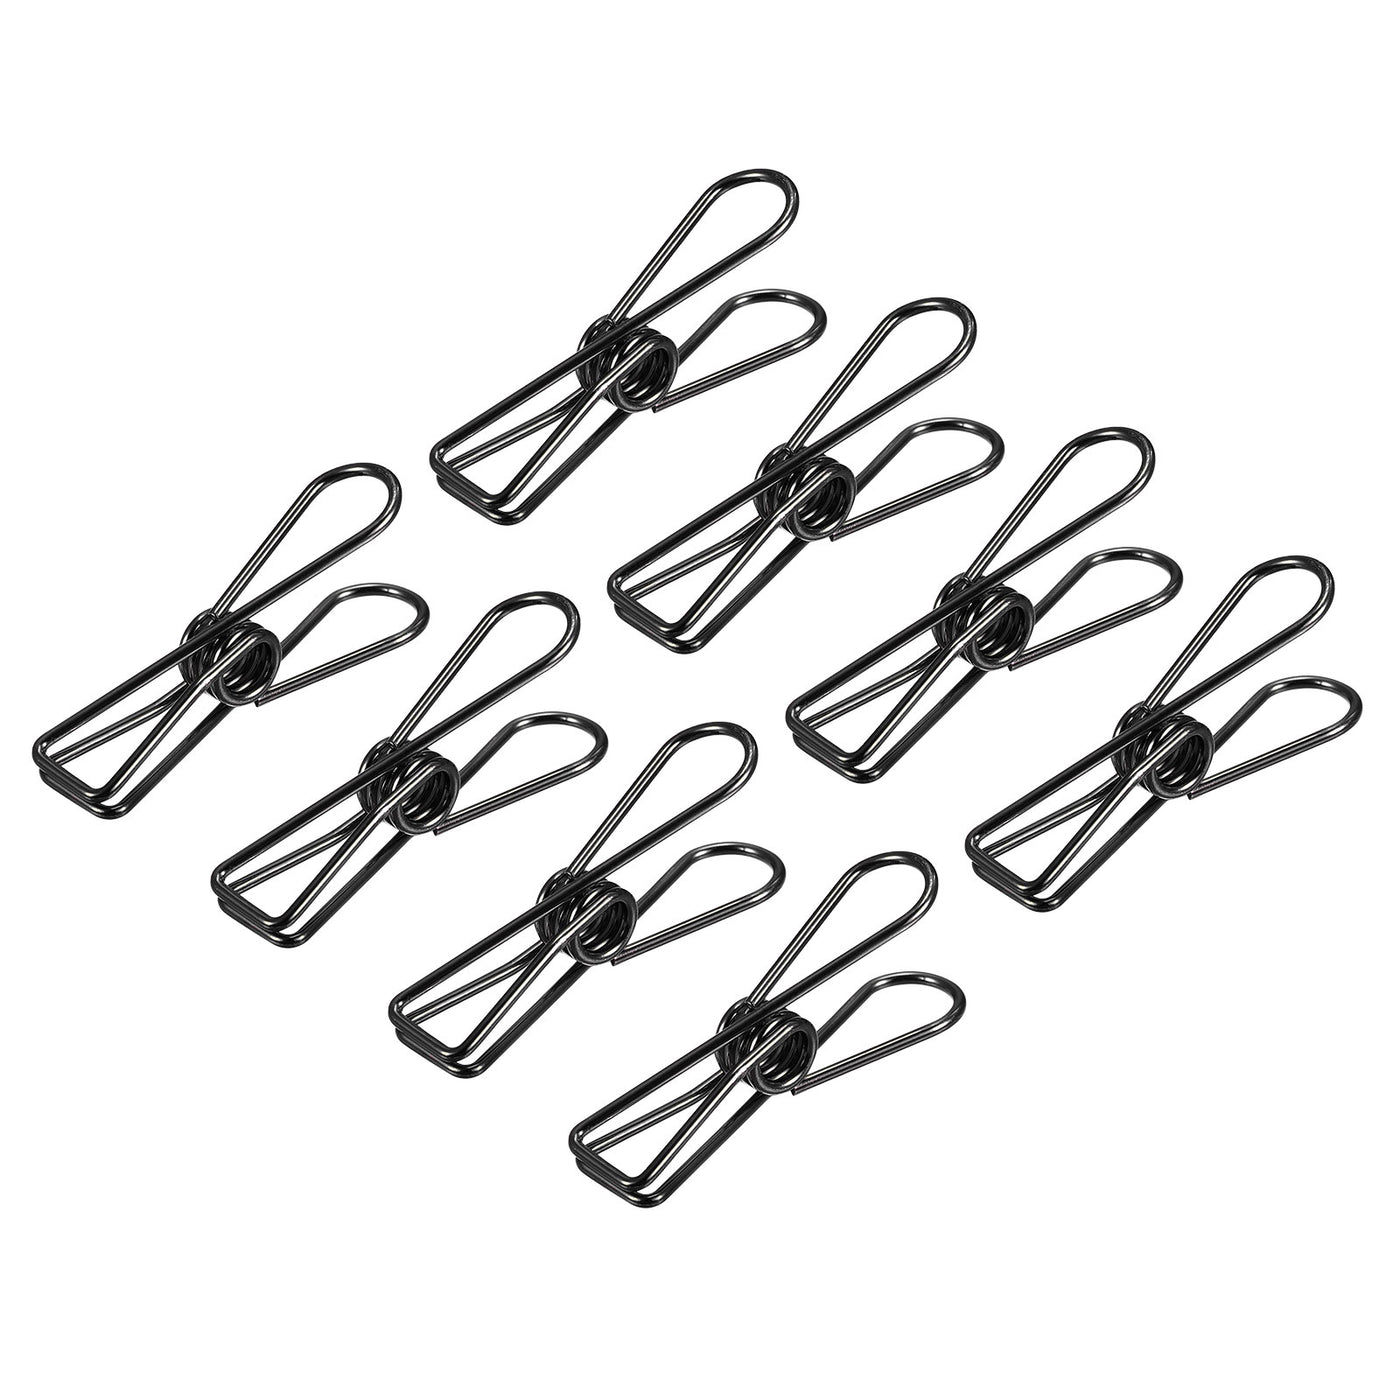 uxcell Uxcell Tablecloth Clips, 32mm Carbon Steel Clamps for Fixing Table Cloth, Black 8 Pcs